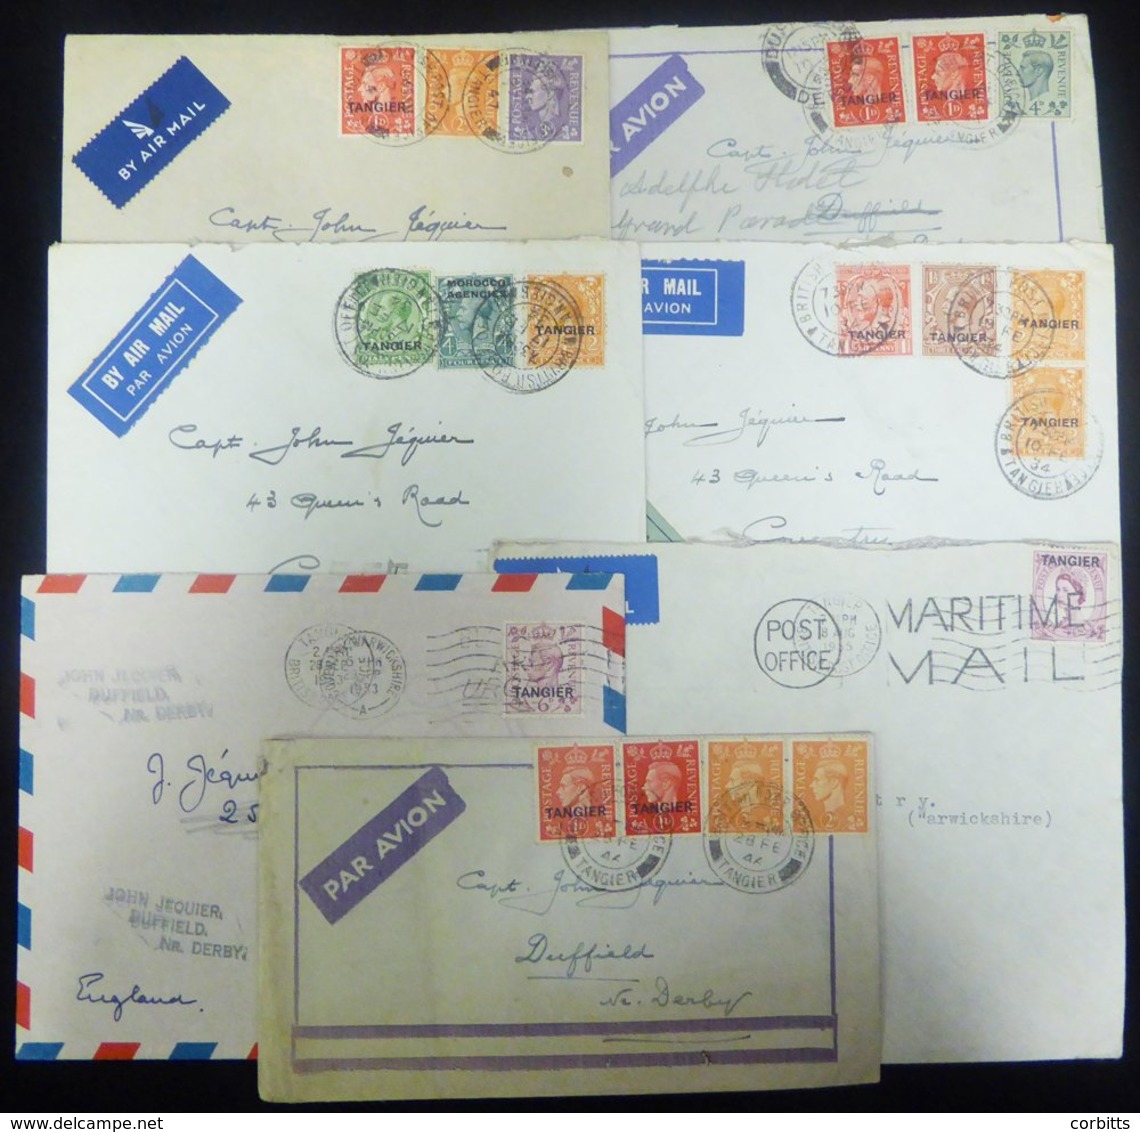 TANGIER 1934-55 Airmail Envelopes (7) To England, An Interesting Study In The Airmail Rates Over A 21 Year Period. - Other & Unclassified